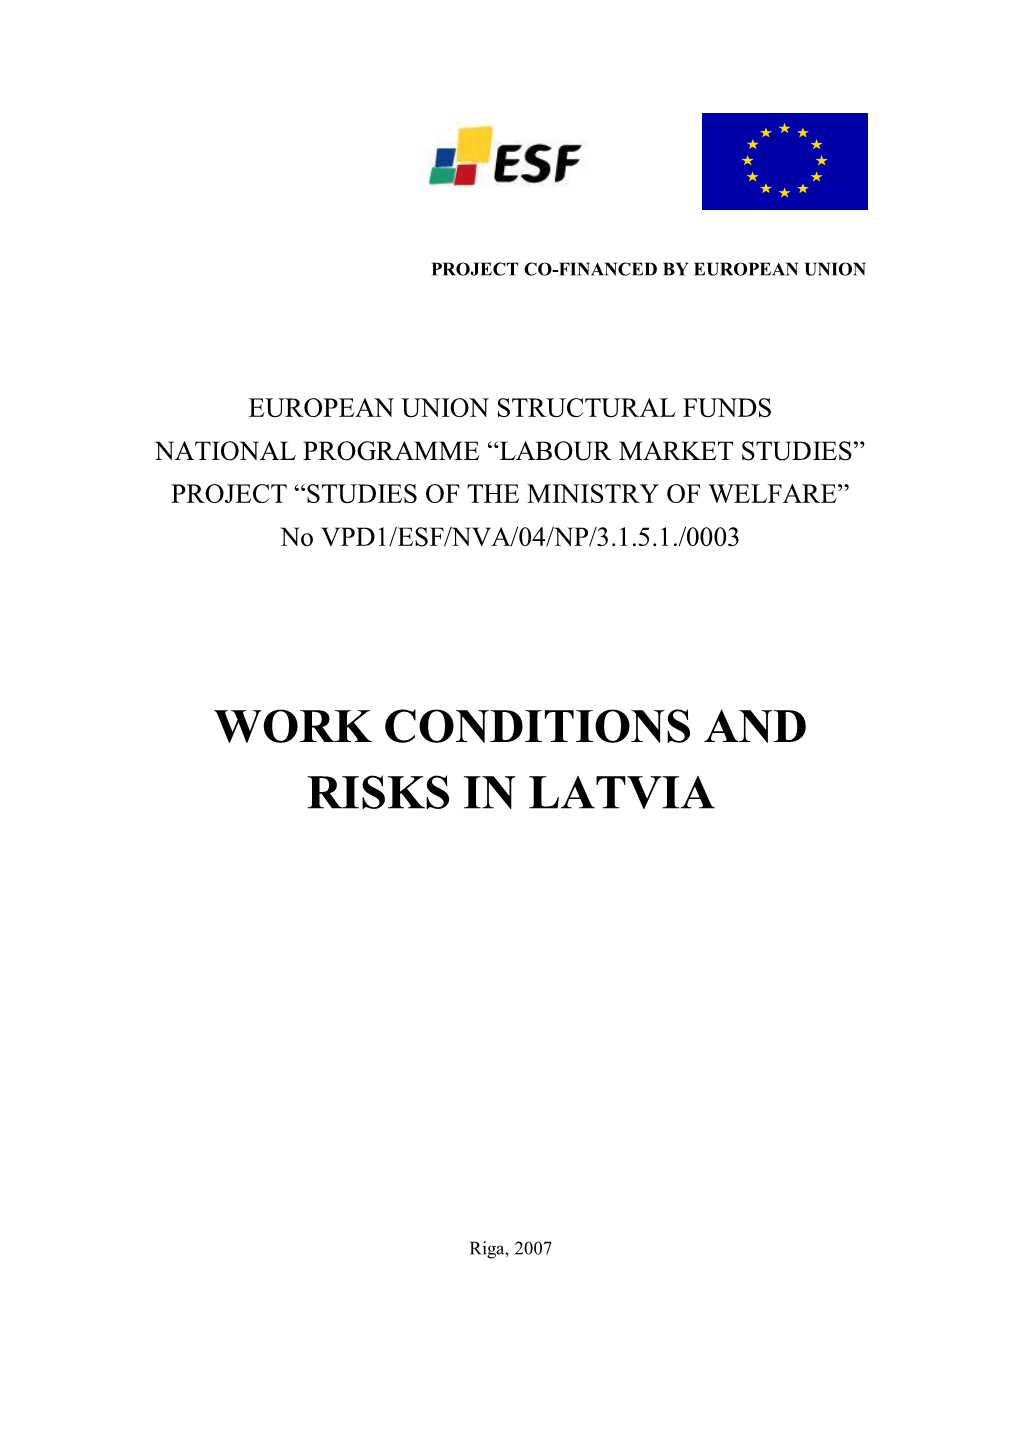 Work Conditions and Risks in Latvia